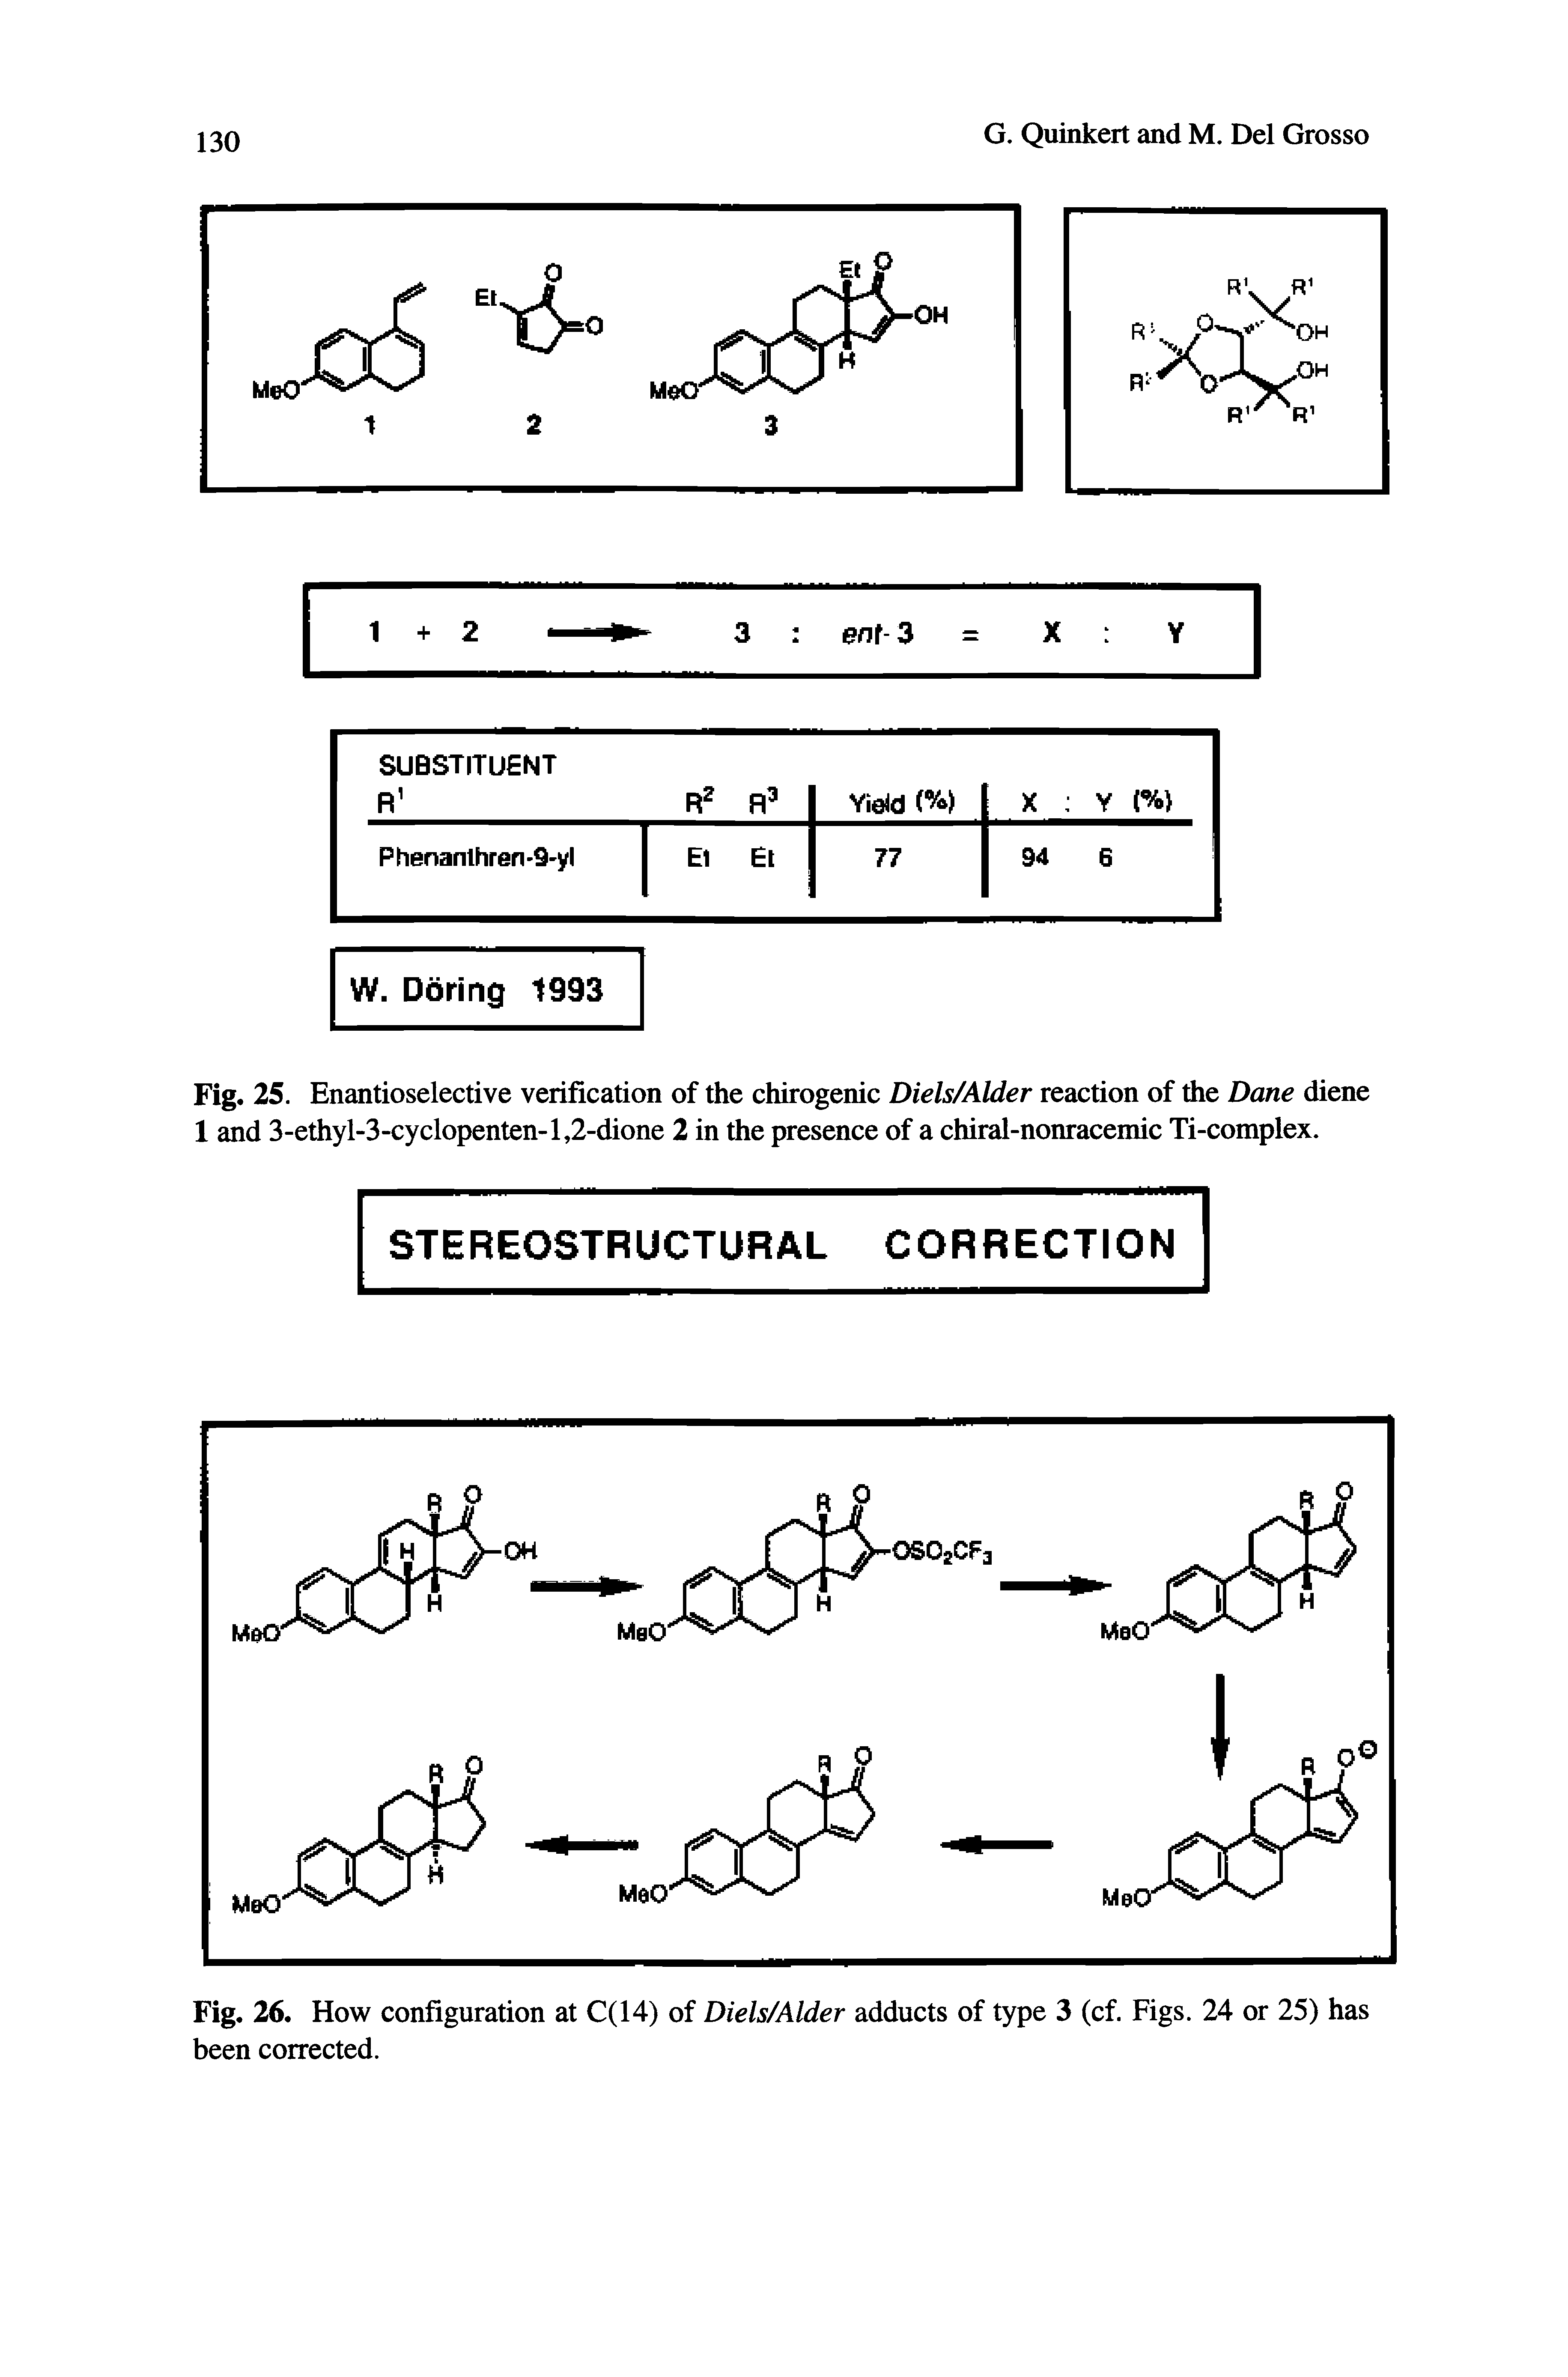 Fig. 25. Enantioselective verification of the chirogenic Diels/Alder reaction of the Dane diene 1 and 3-ethyl-3-cyclopenten-l,2-dione 2 in the presence of a chiral-nonracemic Ti-complex.